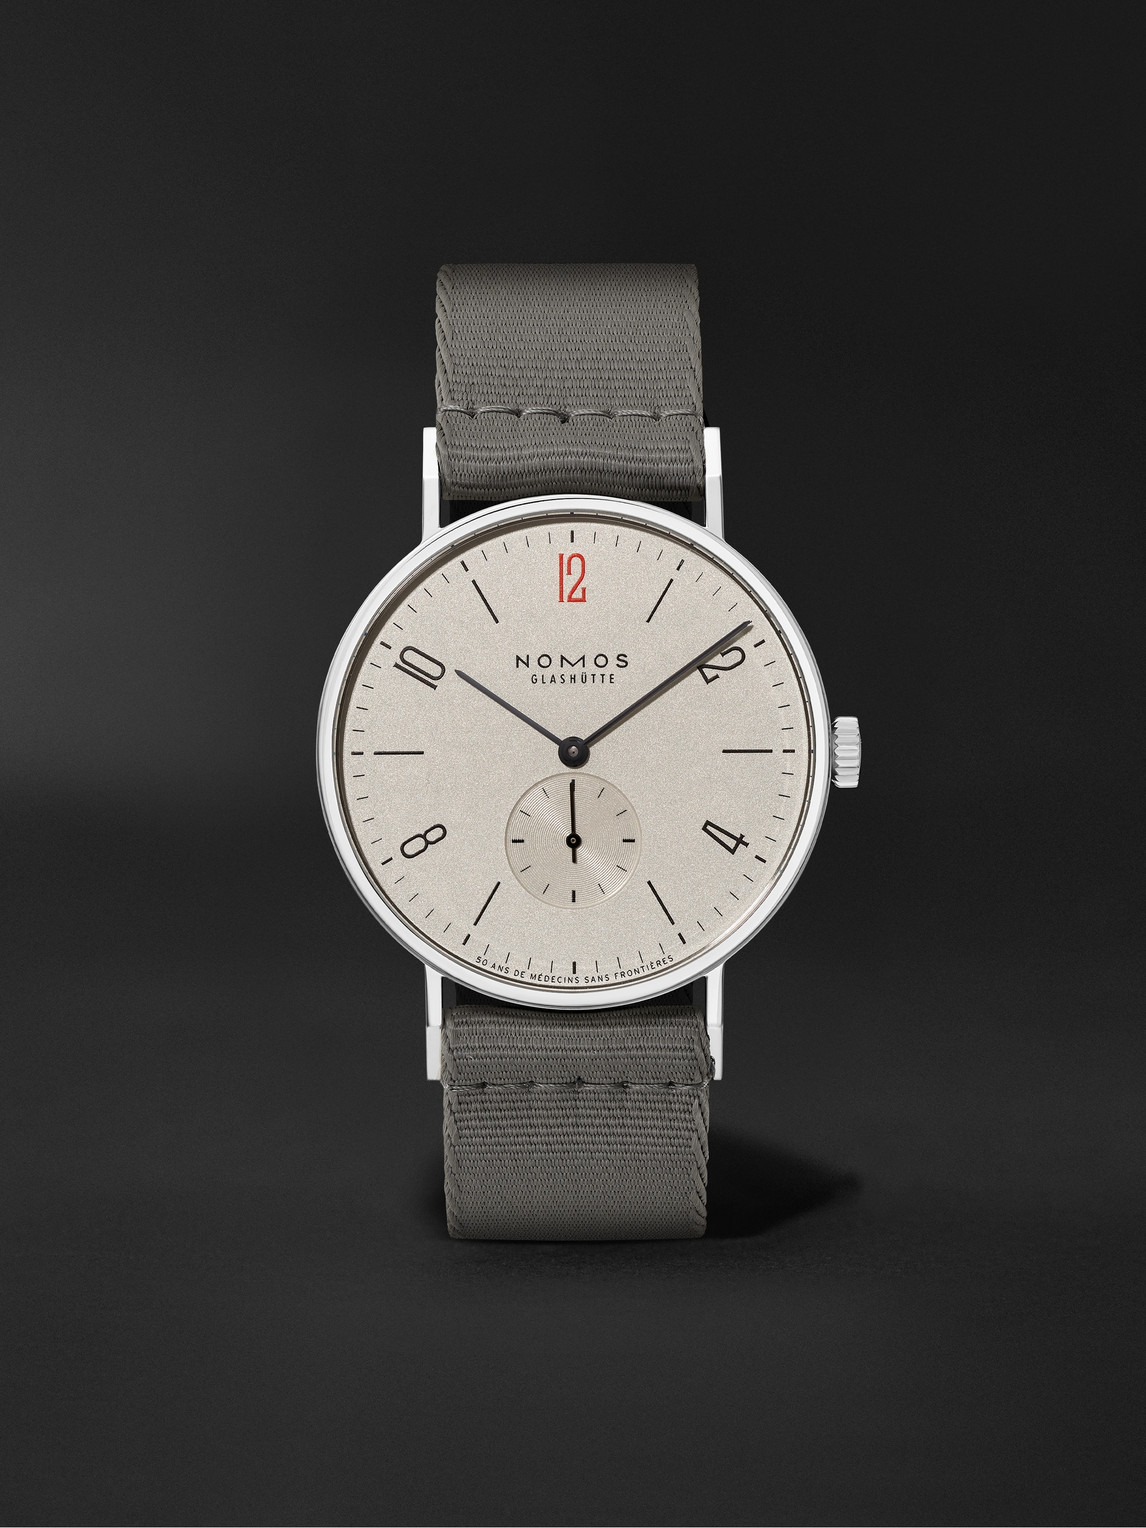 Nomos Glashütte Tangente 38 Limited Edition Hand-wound 37.5mm Stainless Steel And Canvas Watch, Ref. No. 165.s50 In Unknown